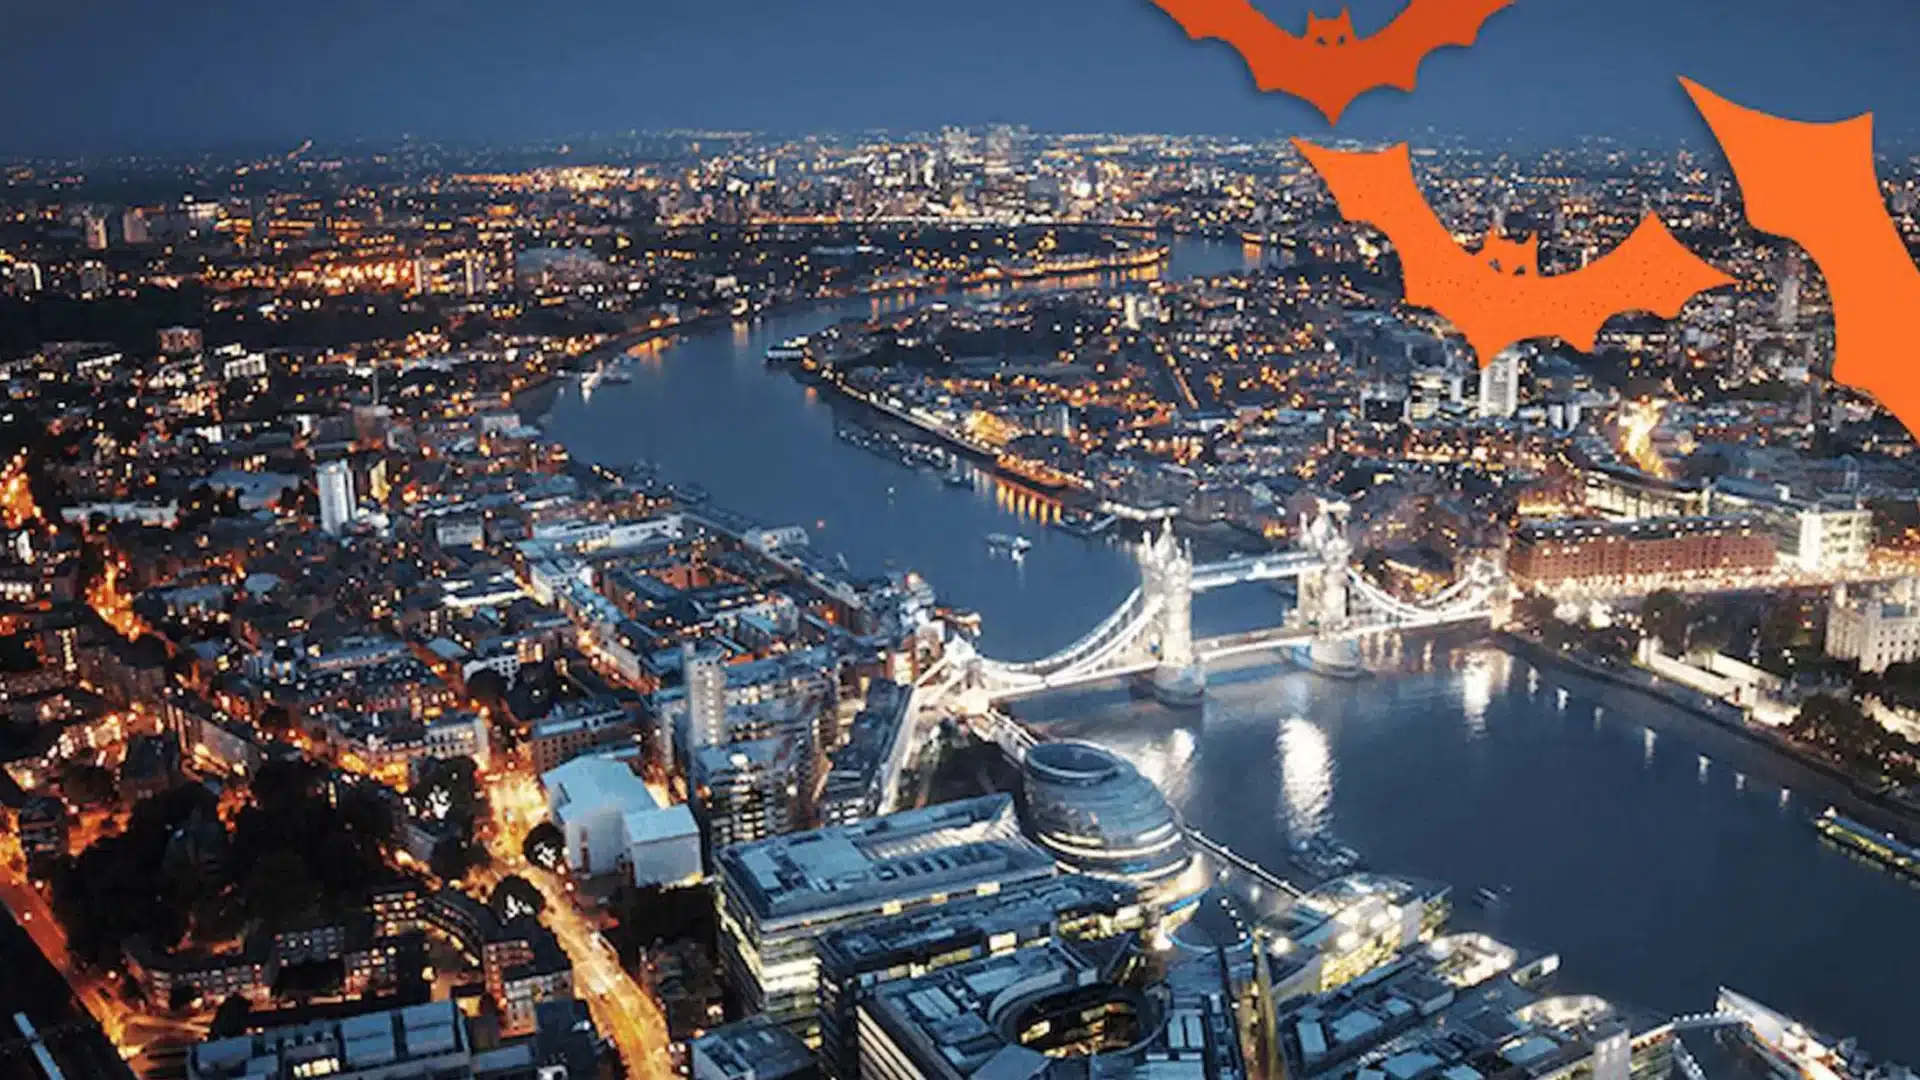 Aerial shot of London with orange bats